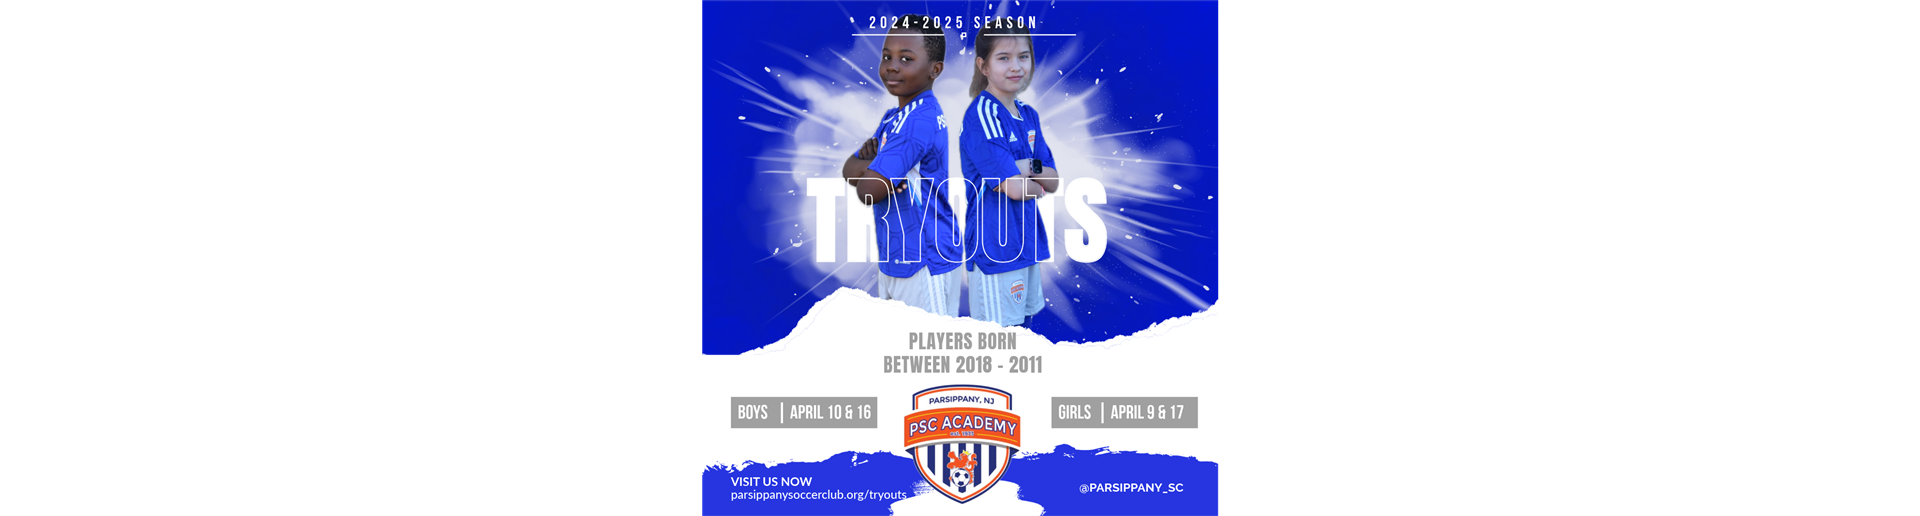 PSC Travel Tryouts